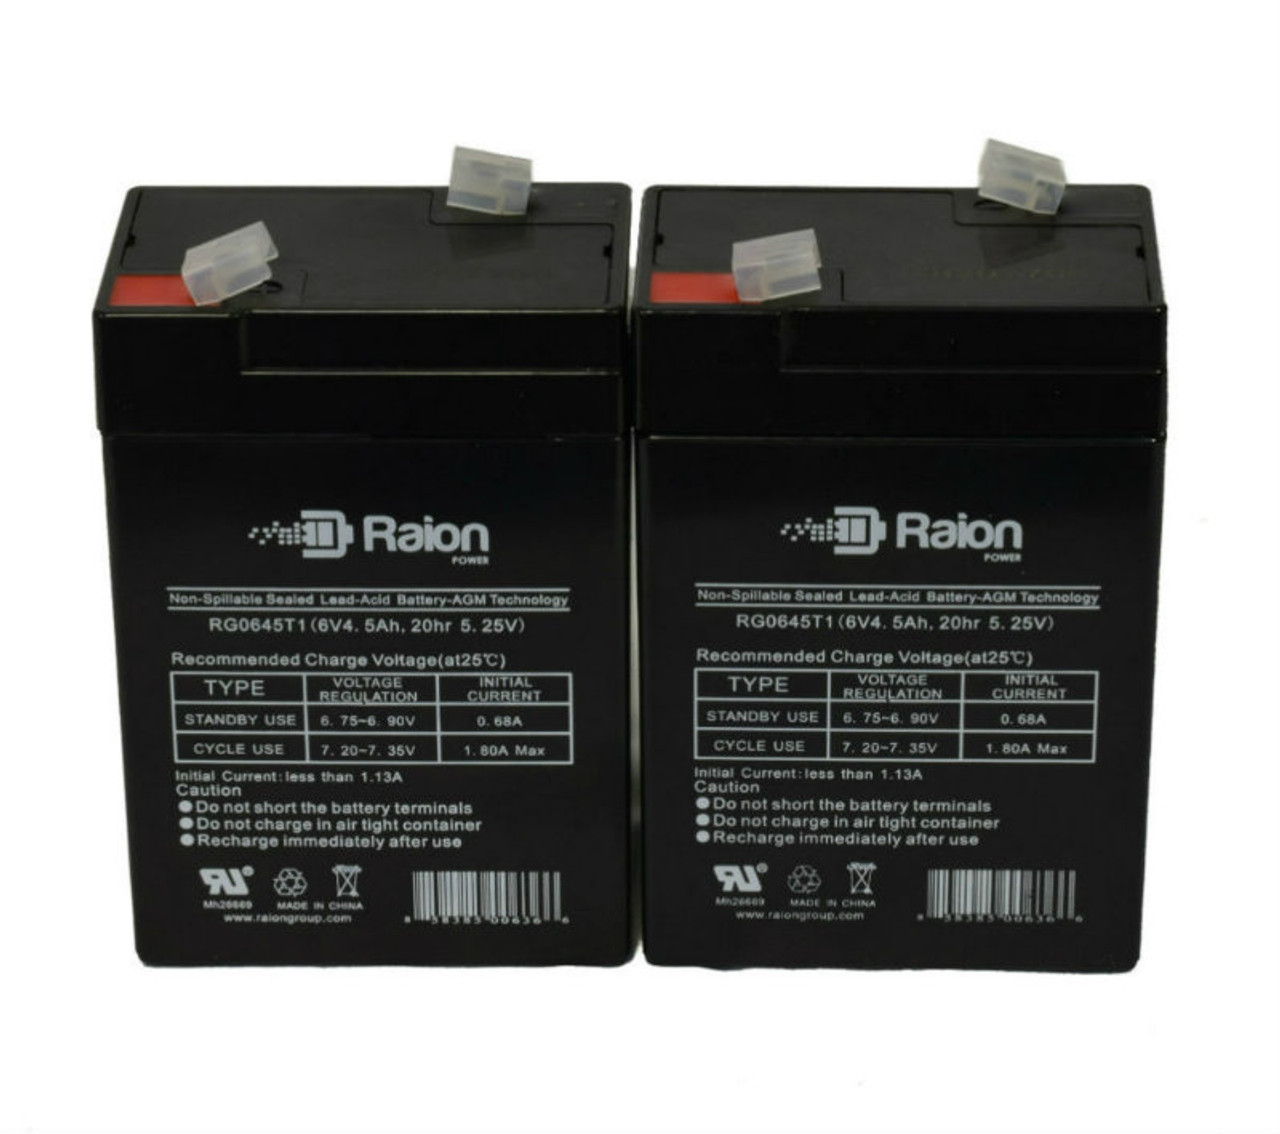 Raion Power 6V 4.5Ah Replacement Emergency Light Battery for Sure-Lites 4C1 - 2 Pack